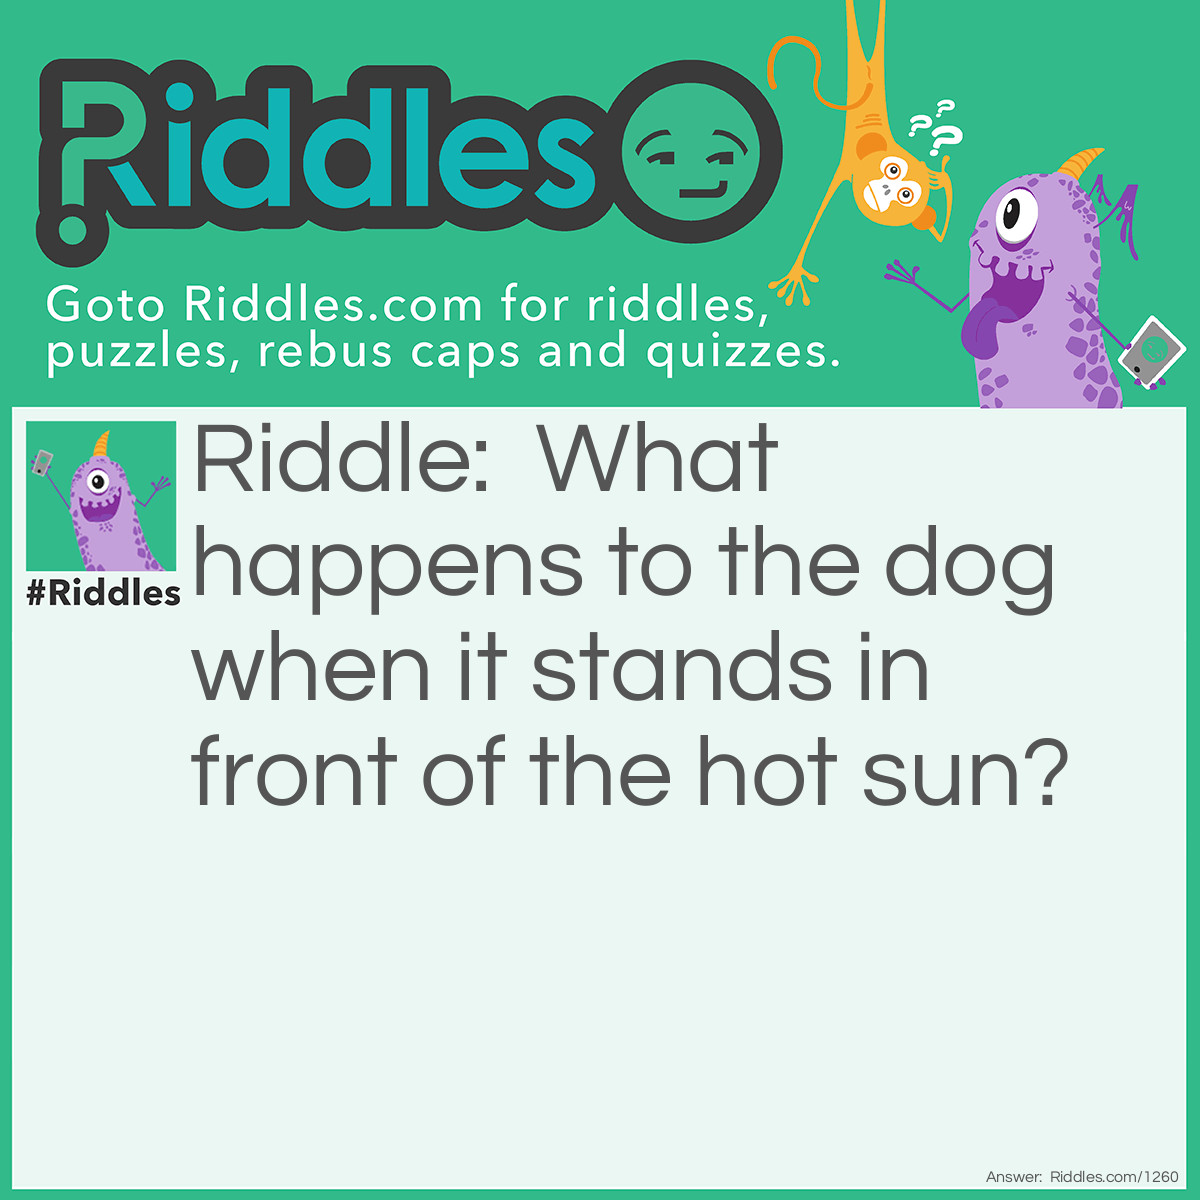 Riddle: What happens to the dog when it stands in front of the hot sun? Answer: It becomes a hotdog.